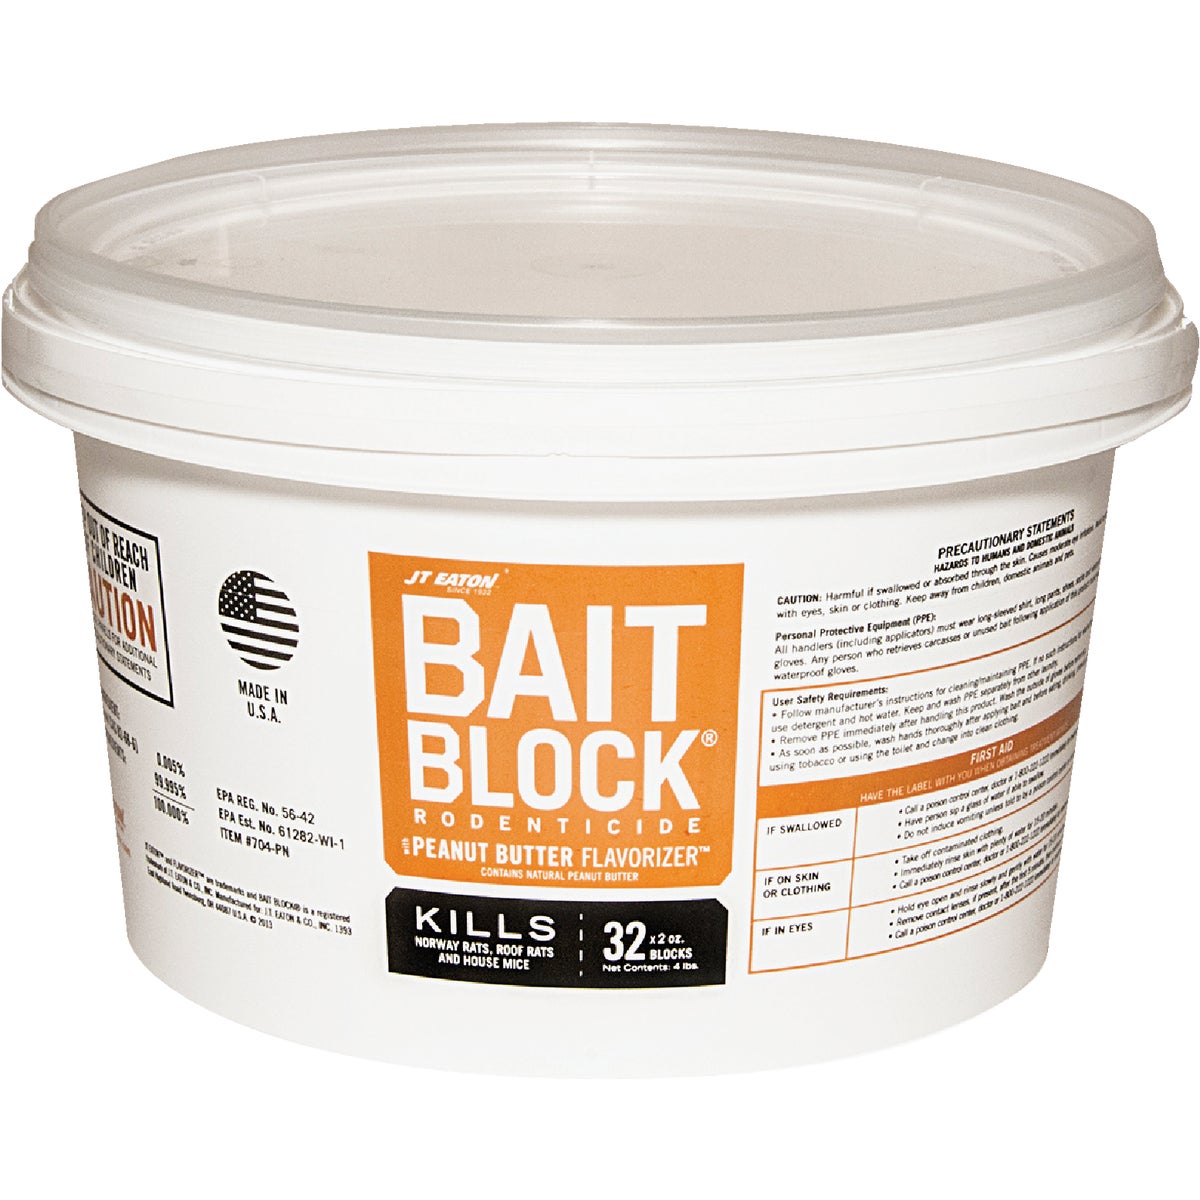 Item 701905, Peanut butter flavor Bait Block for rats and mice.